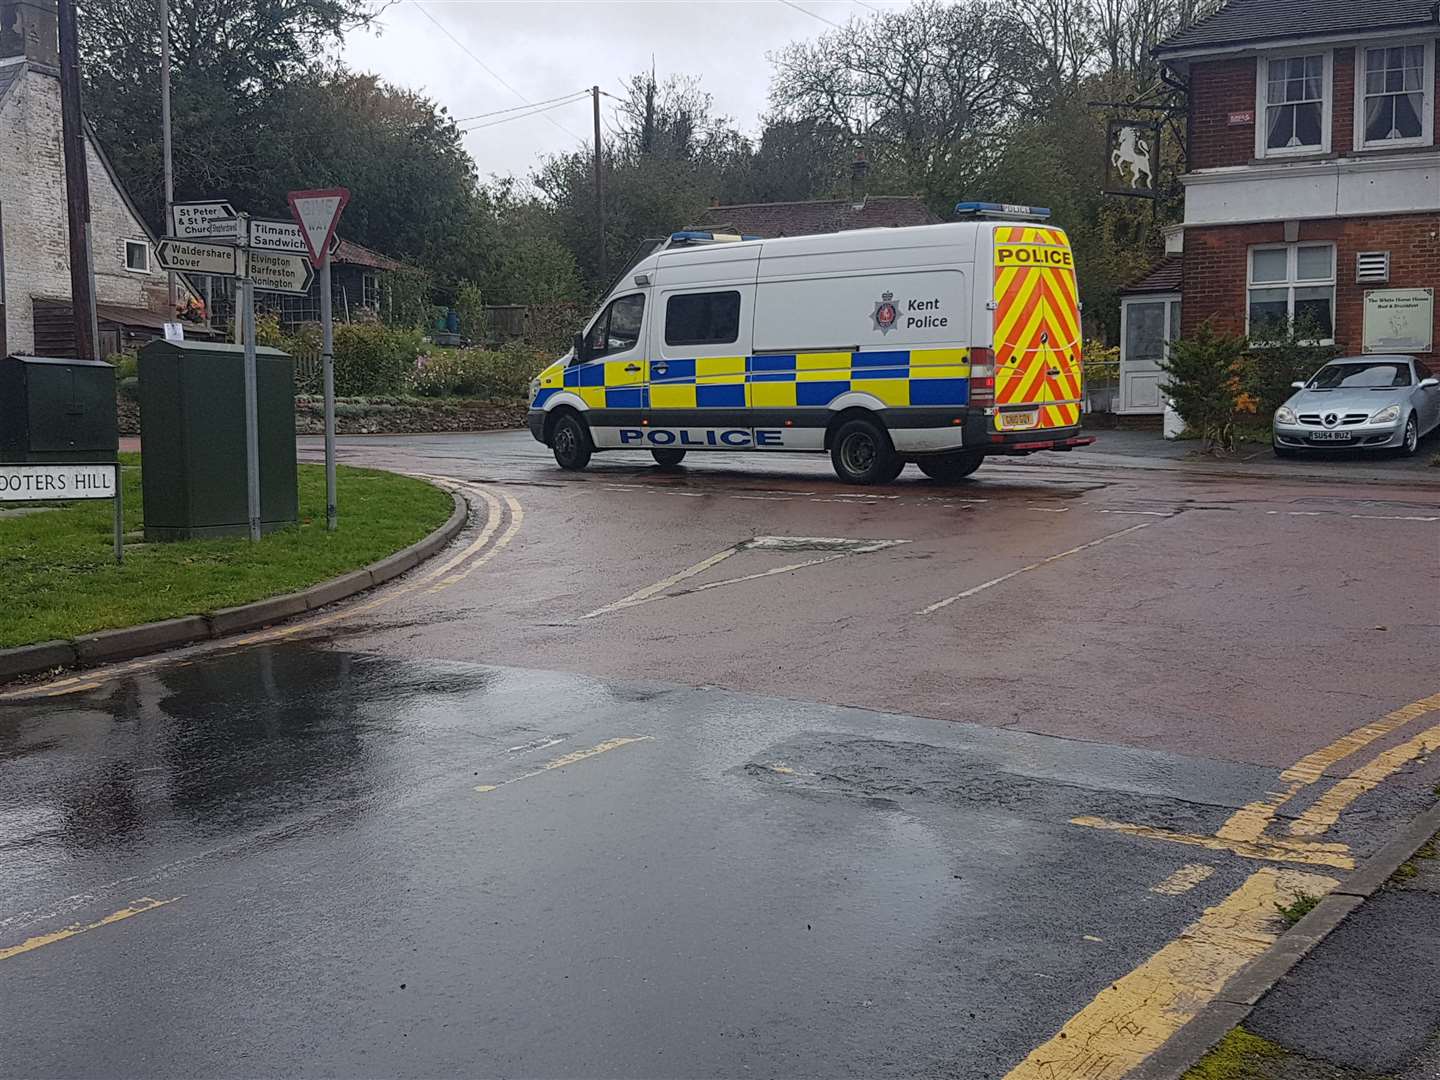 One of a number of police vehicles spotted in Eythorne